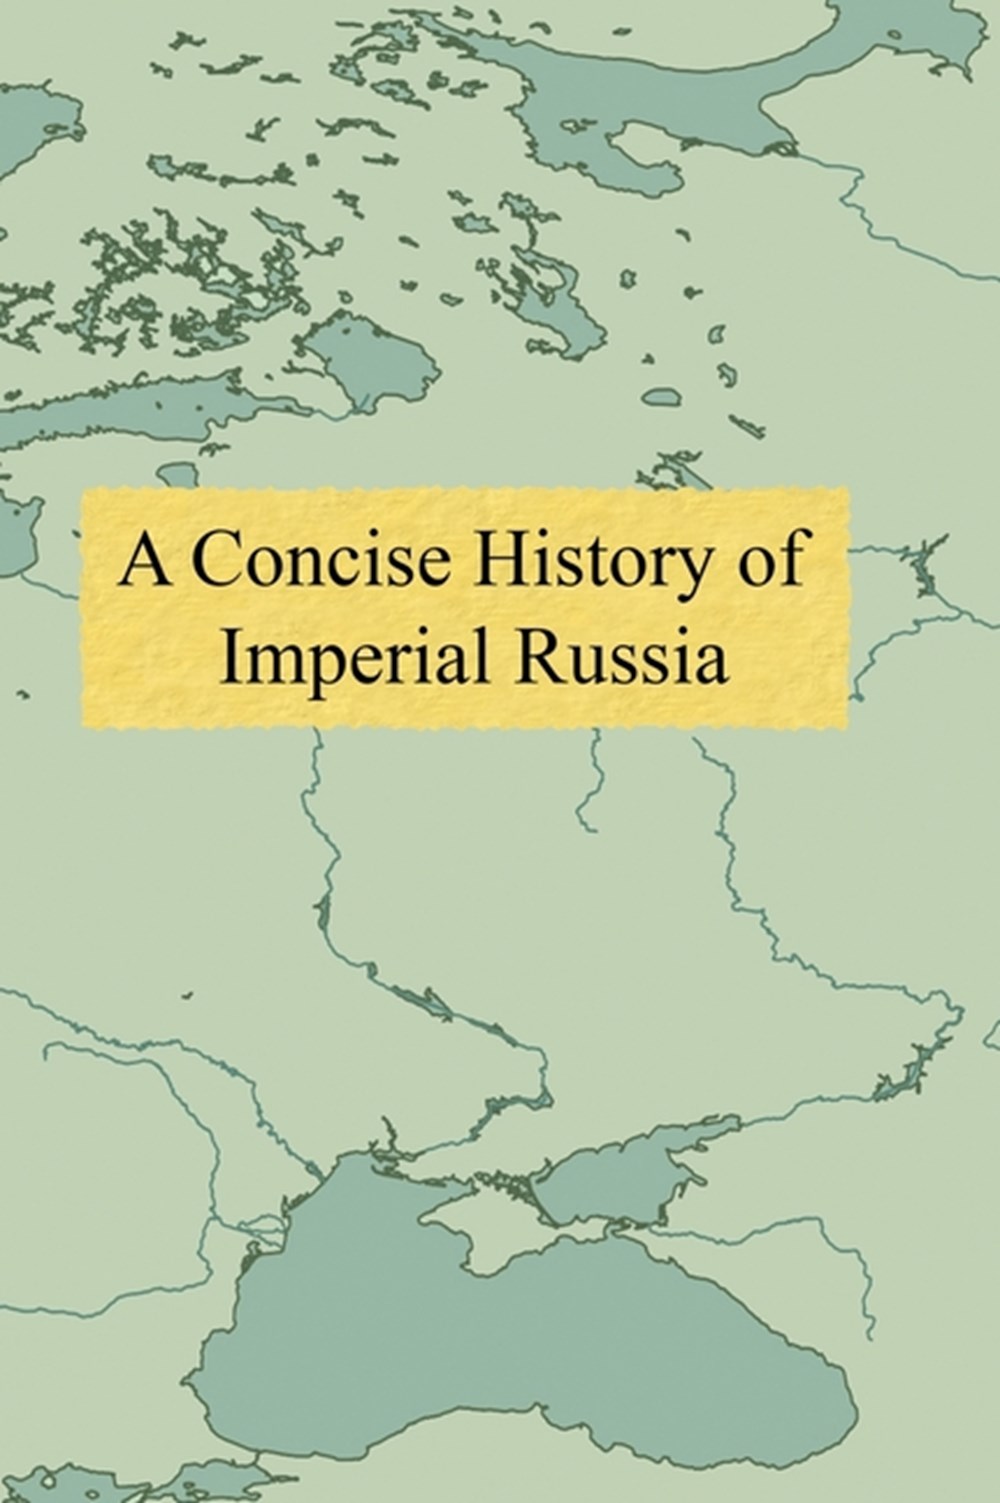 Concise History of Imperial Russia